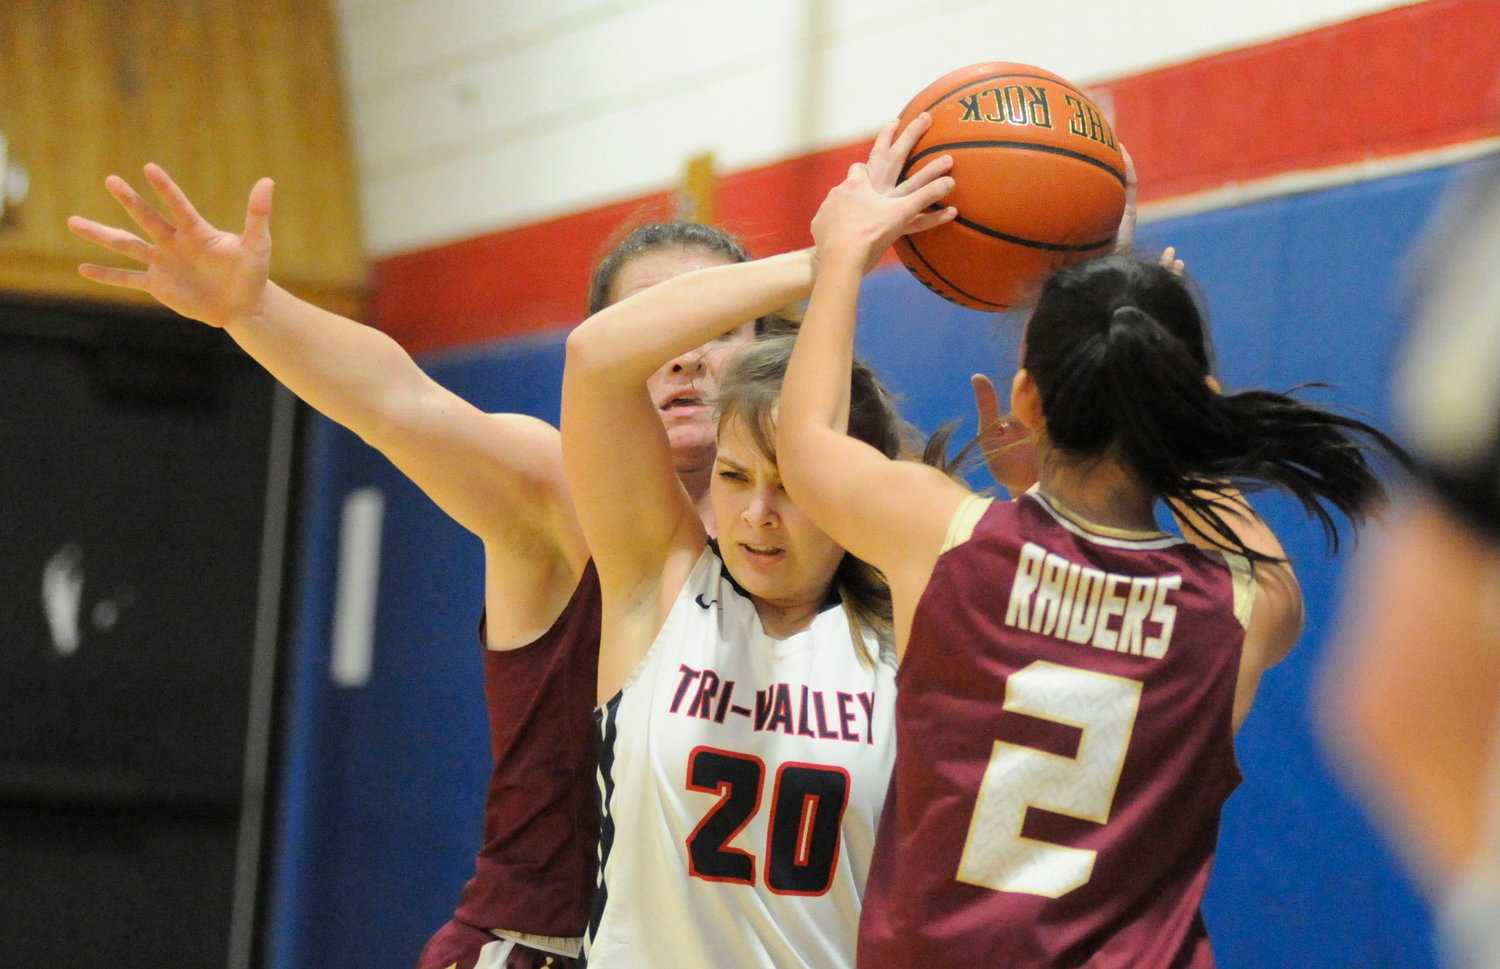 Boxed in. Tri-Valley’s Abbigail Mentnech is hemmed in by O’Neill defenders Daisy West and Adah Spain, who on offense respectively scored 10 points and 14 points...